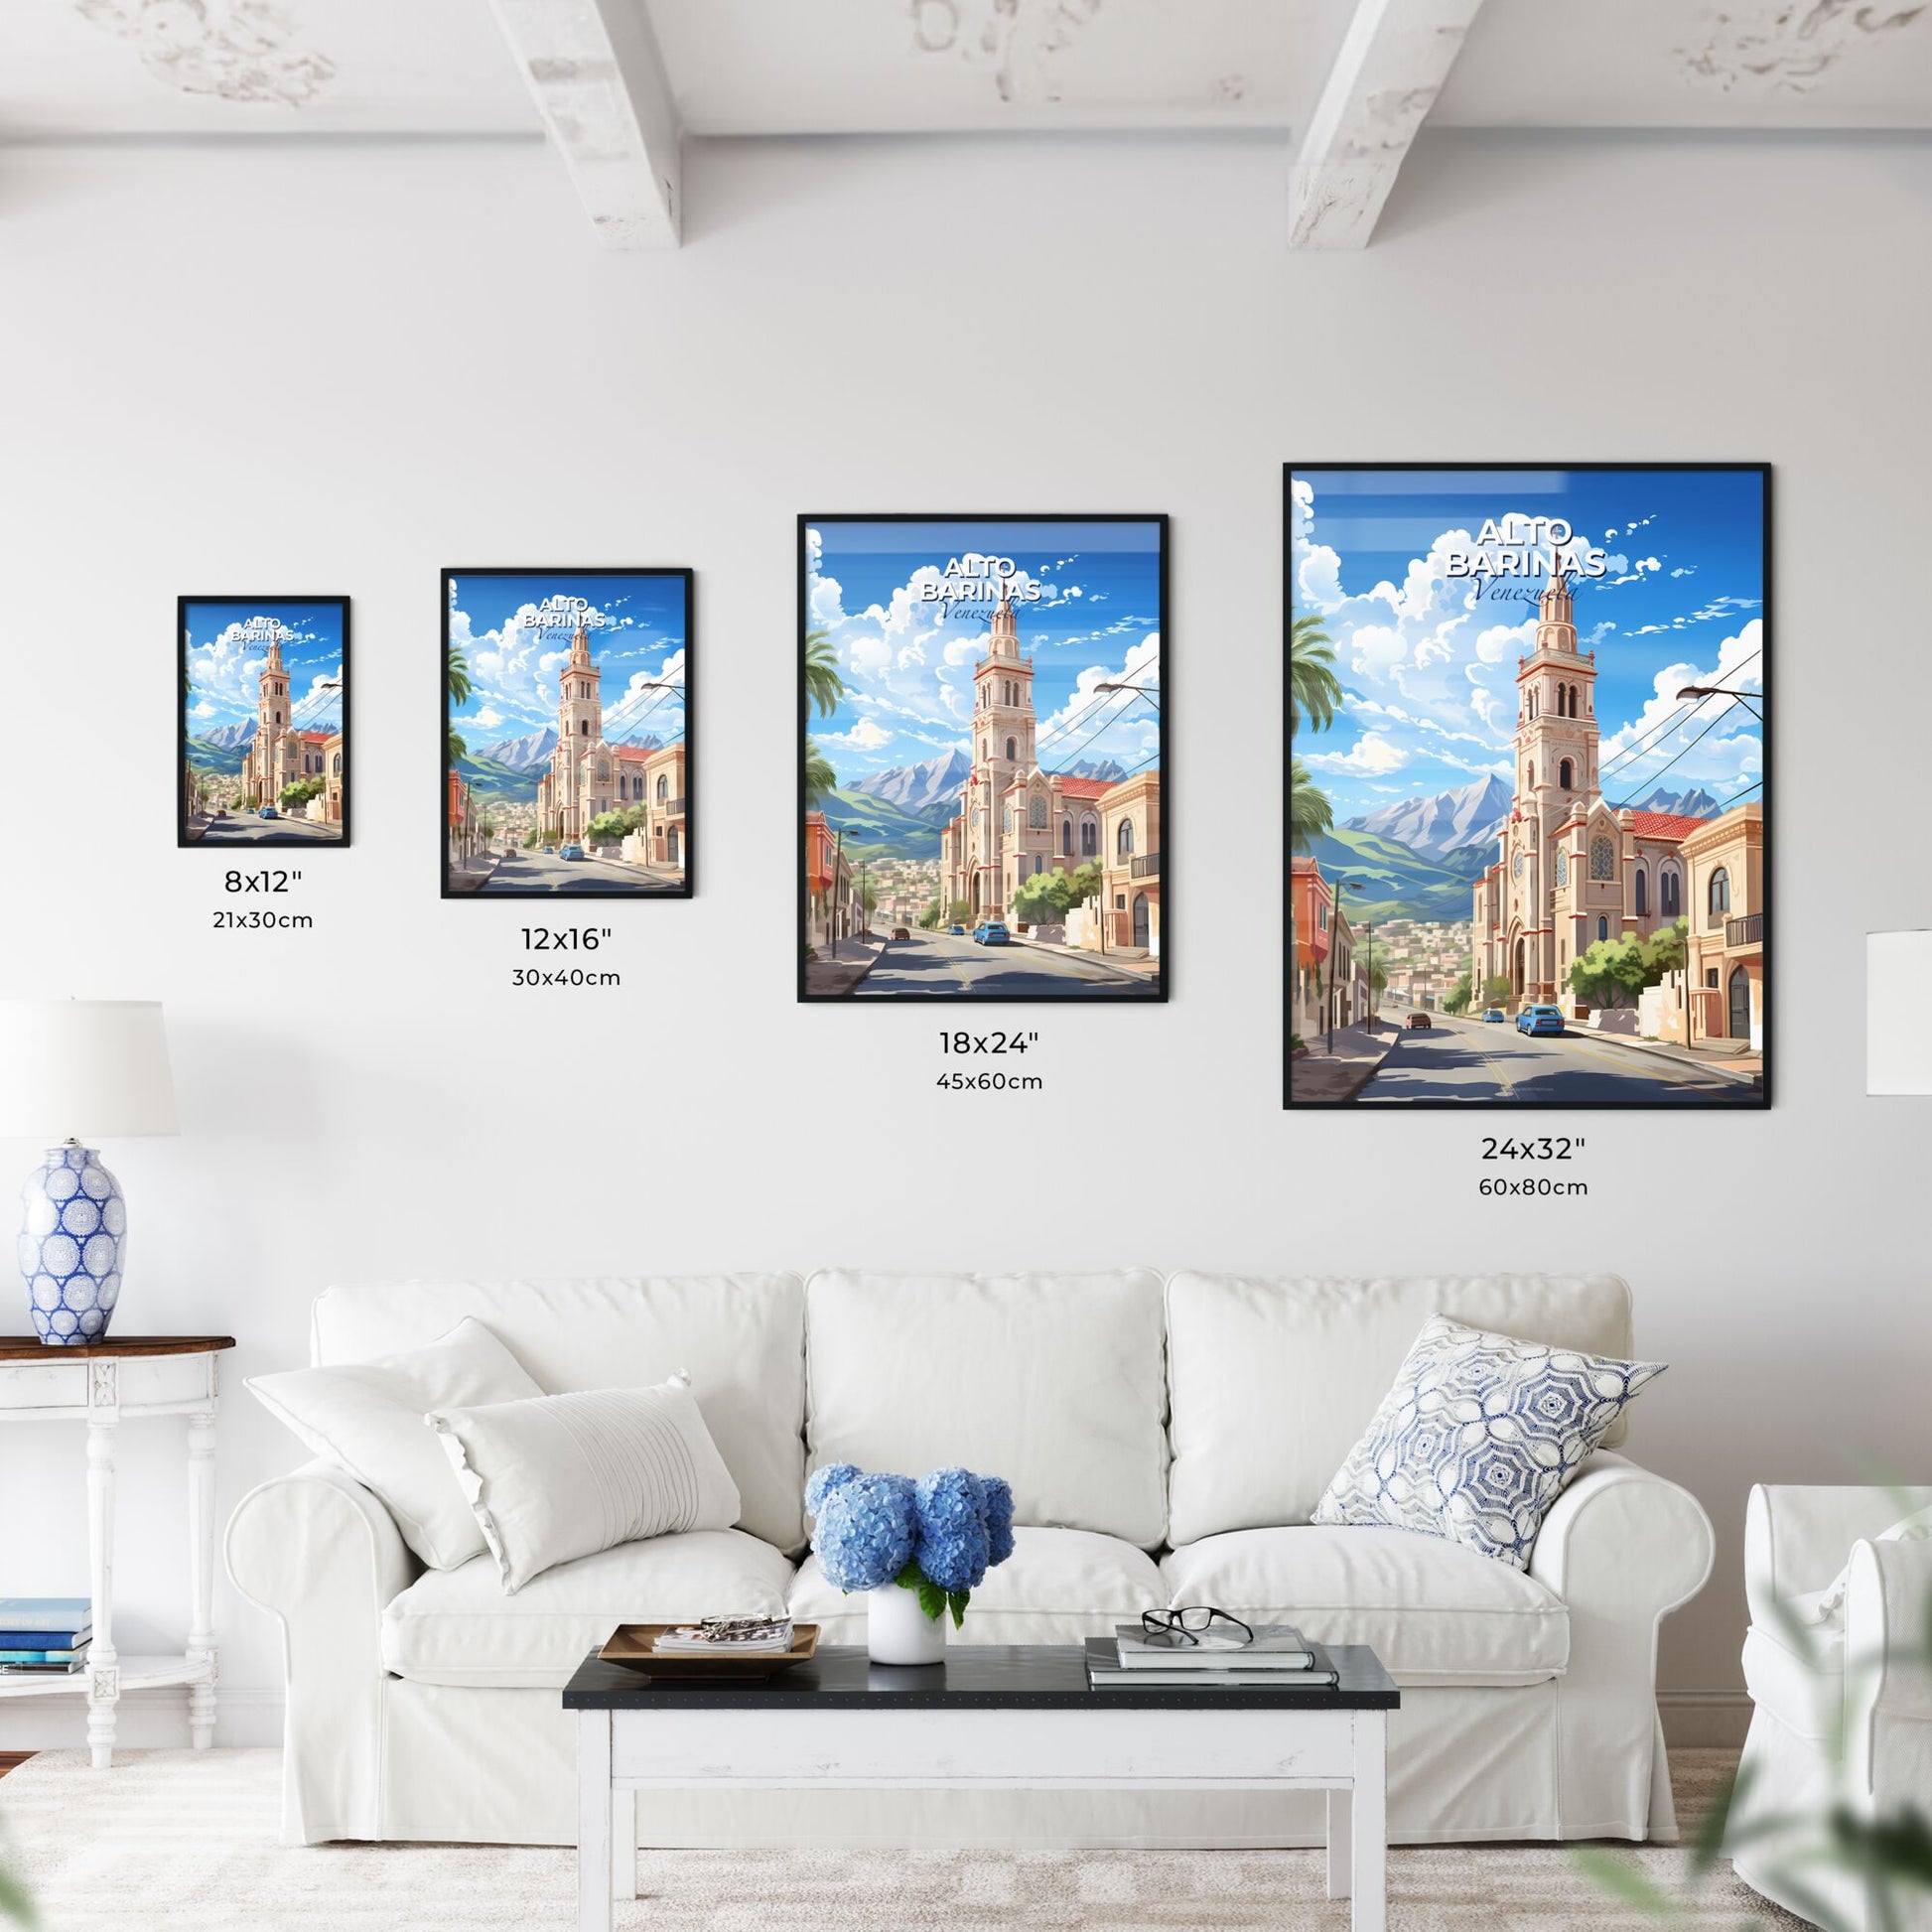 Vibrant Artistic Cityscape Painting: Alto Barinas Venezuela Skyline with Church Steeple and Palm Trees Default Title